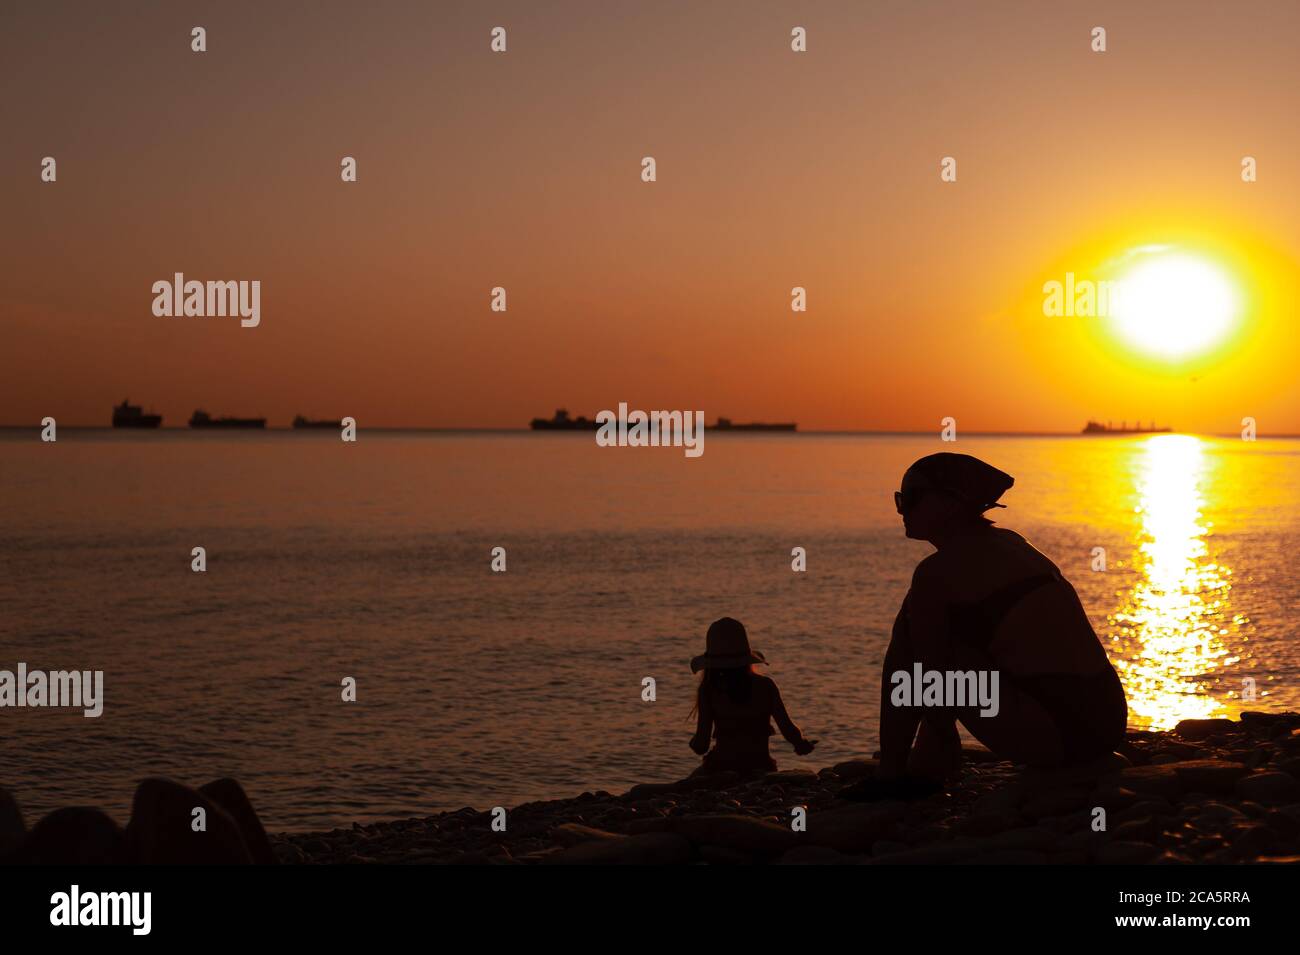 A man standing on a beach in front of a sunset Stock Photo